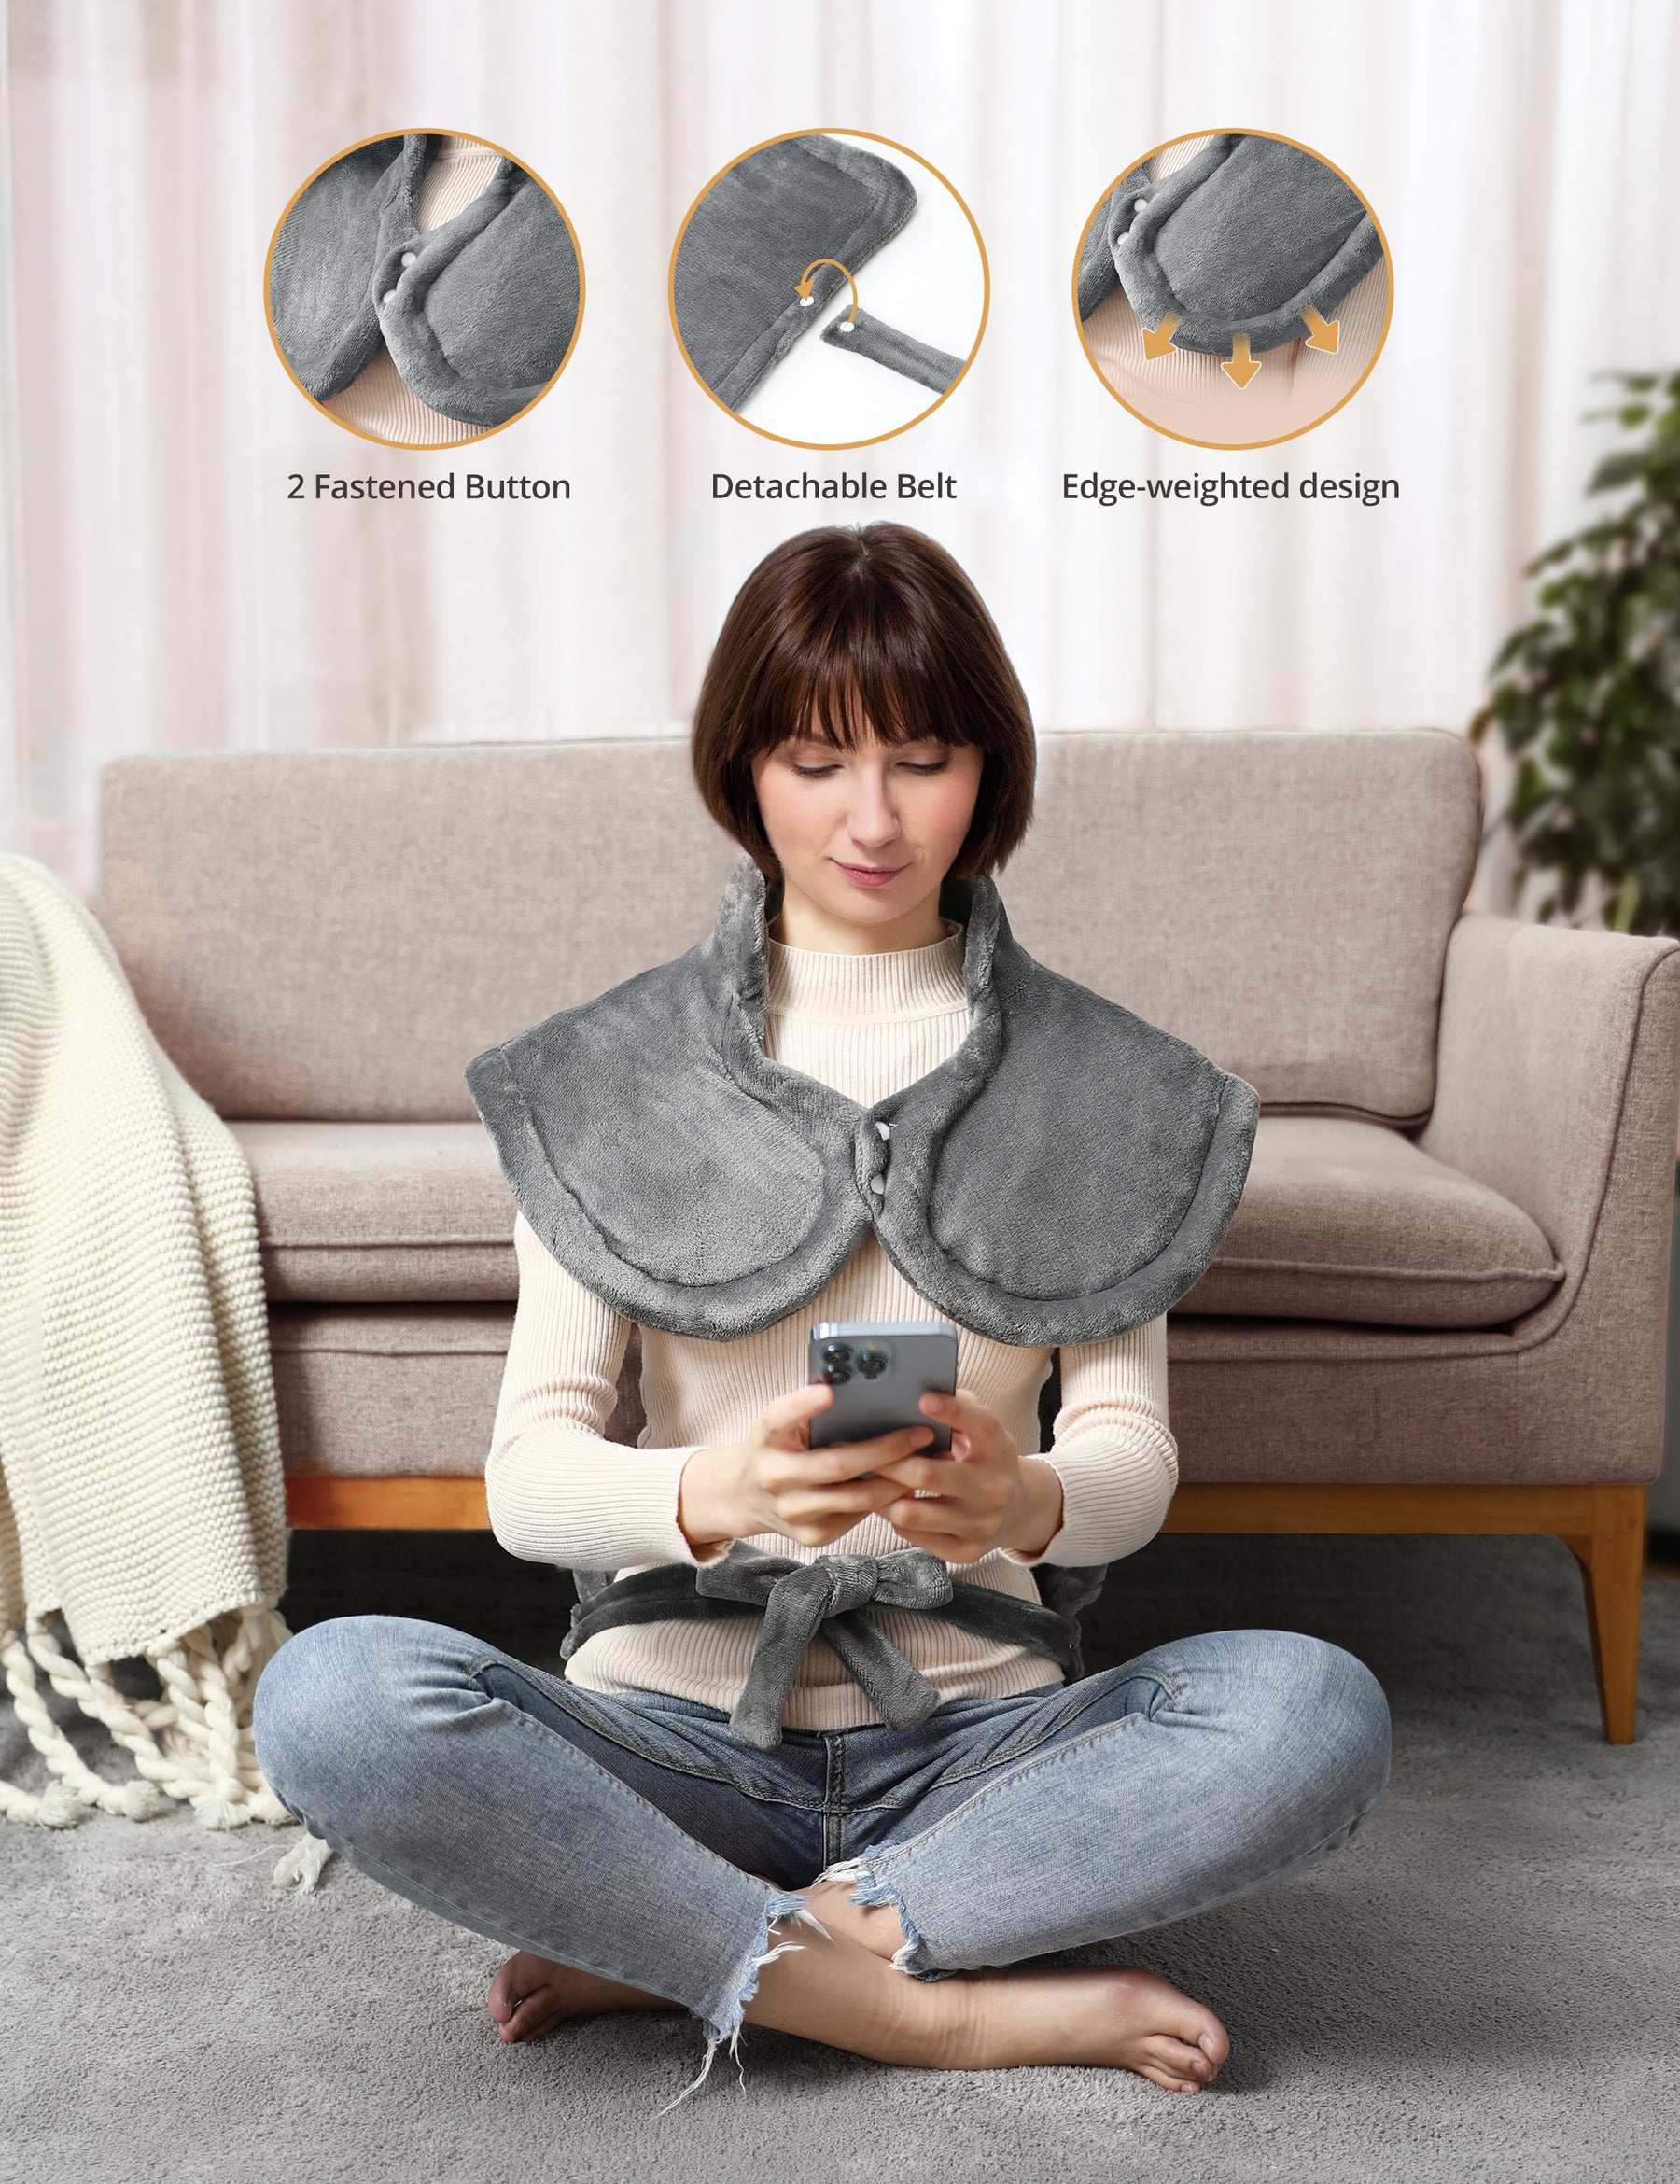 Heating Pad for Neck and Shoulders, 4 Heat Settings Weighted